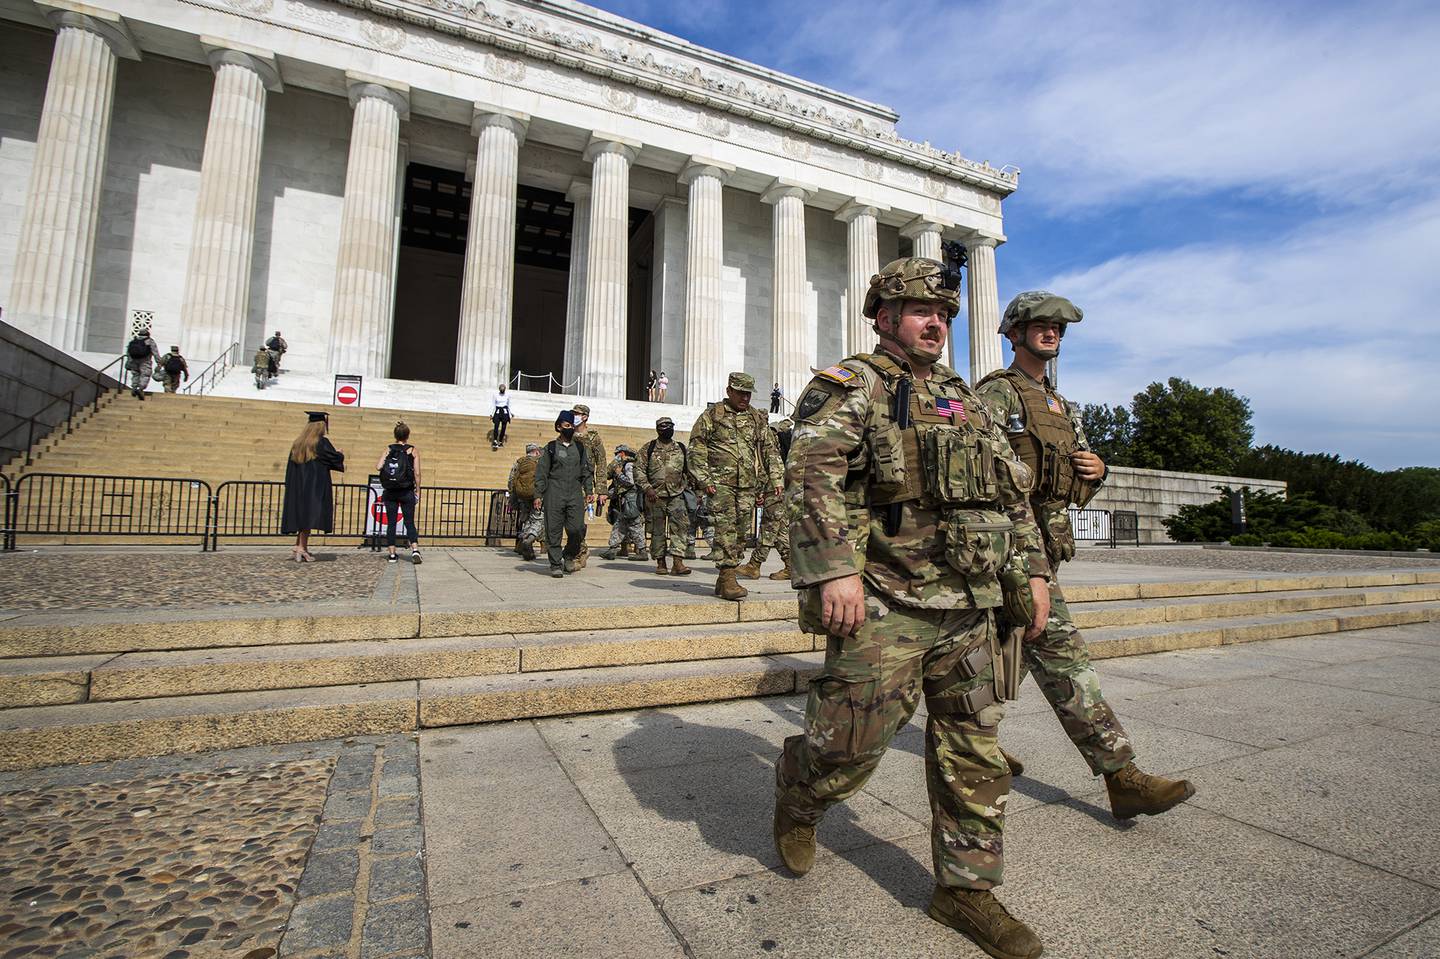 Members of the District of Columbia Army National Guard walk to their designated positions at the National Mall near the Lincoln Memorial in Washington, Wednesday, June 3, 2020, securing the area as protests continue following the death of George Floyd, a who died after being restrained by Minneapolis police officers.